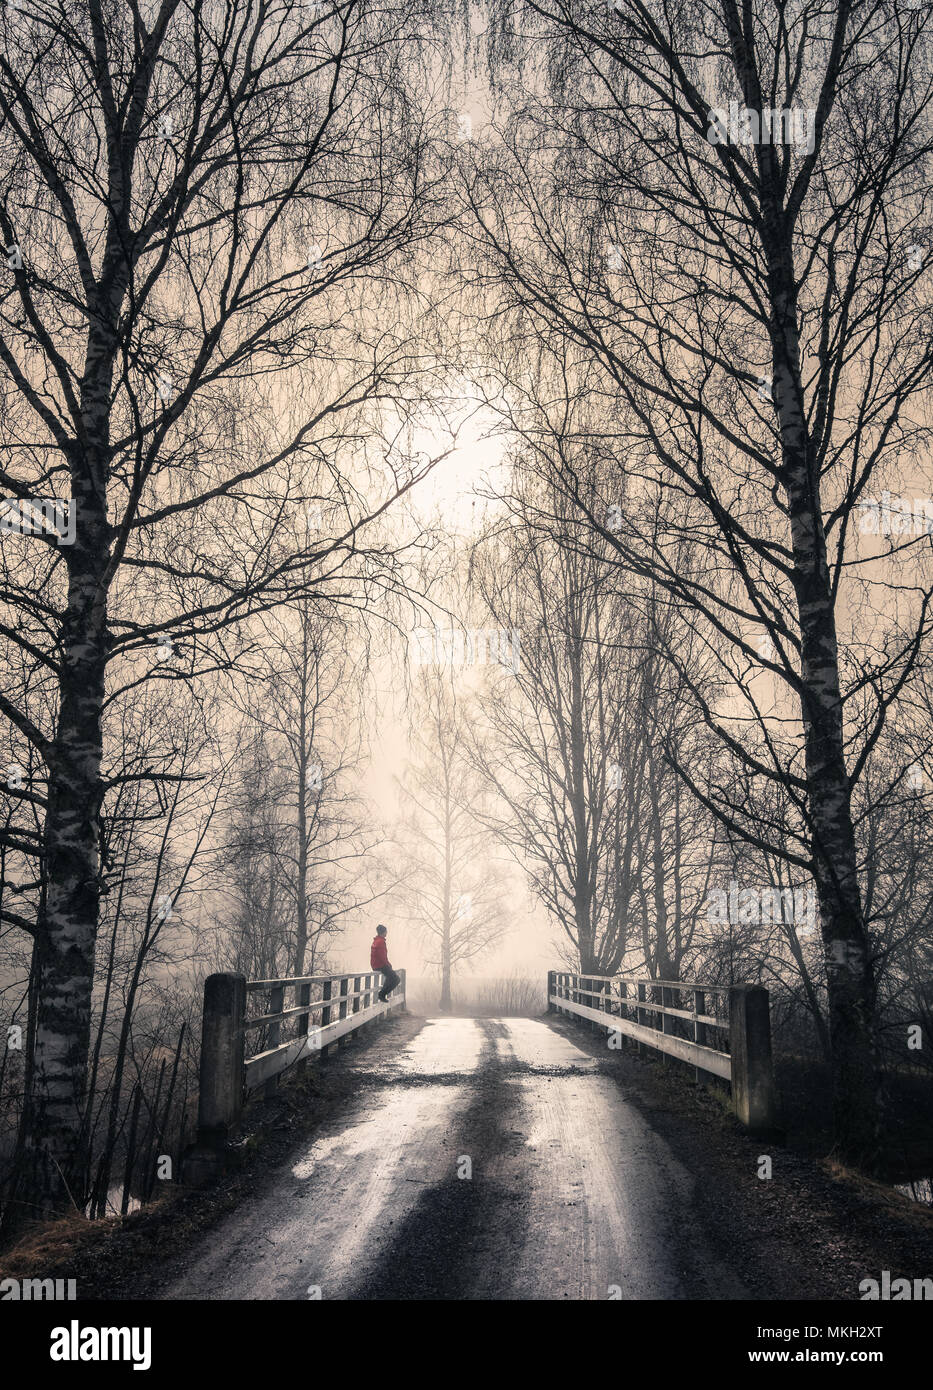 Foggy landscape with old bridge and road at spring morning in Finland. Man sitting in fence. Stock Photo